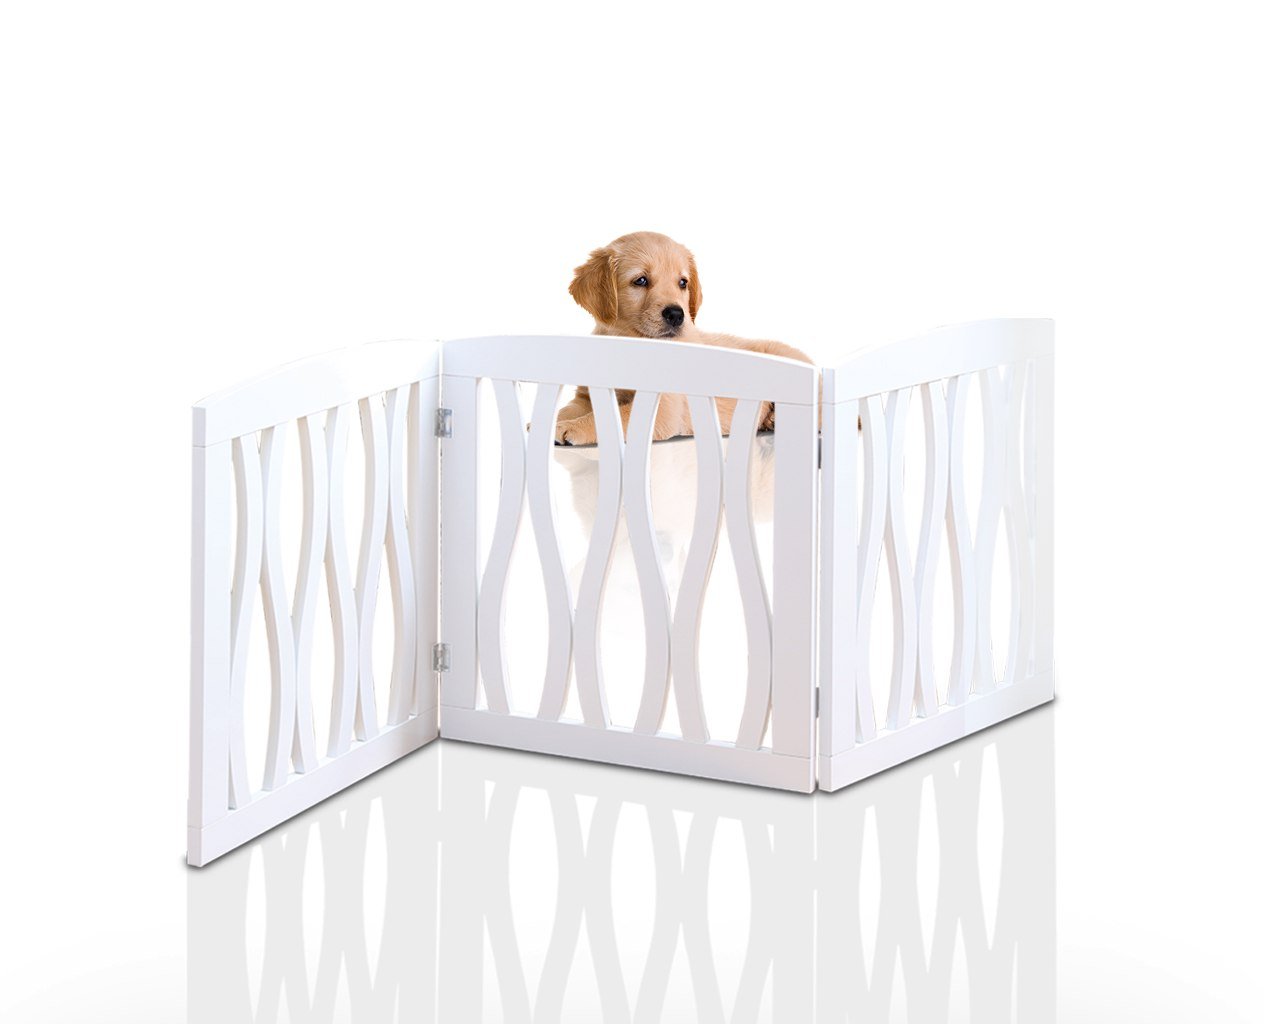 Wooden Pet Gate, Foldable and Freestanding, For Indoor Home and Office Use. Keeps Pets Safe [White Cascade Wave Decorative Design. Easy Set Up, No Tools Required]